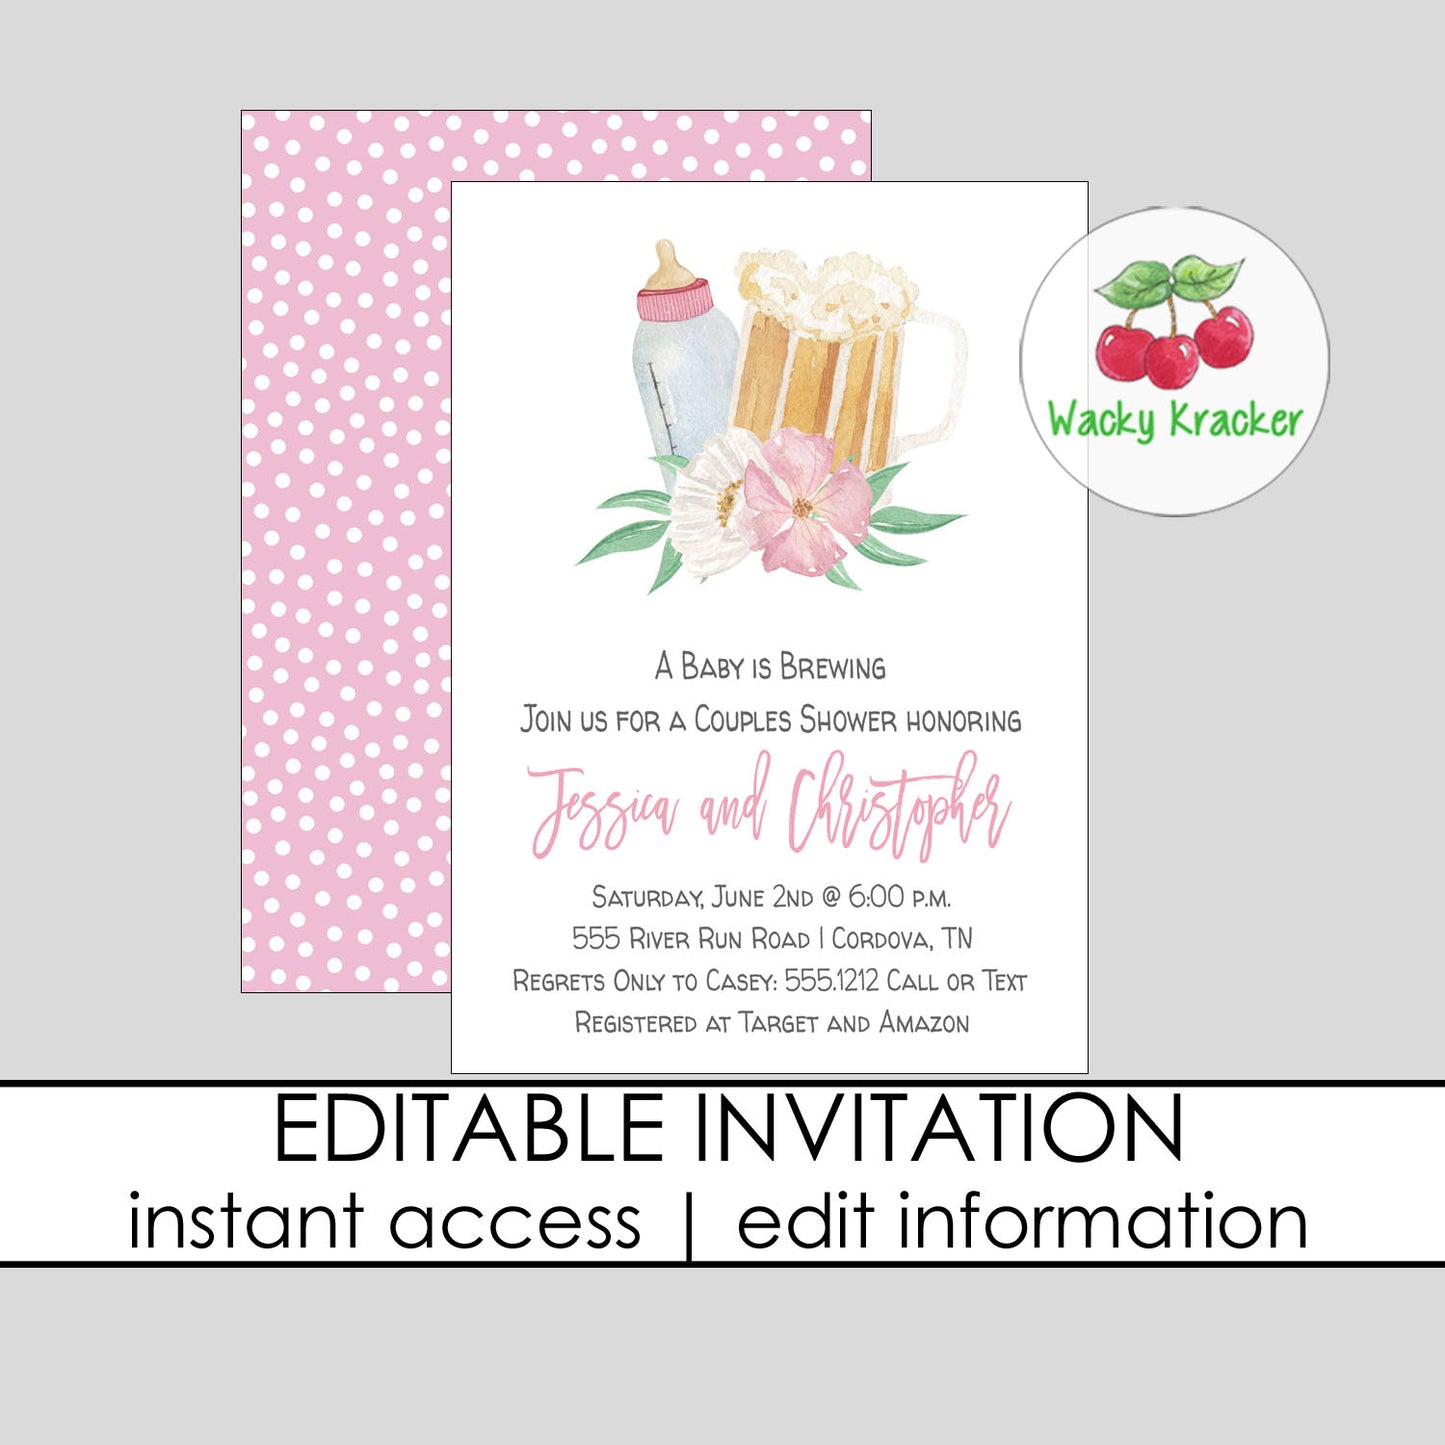 Baby Girl is Brewing Shower Invitation